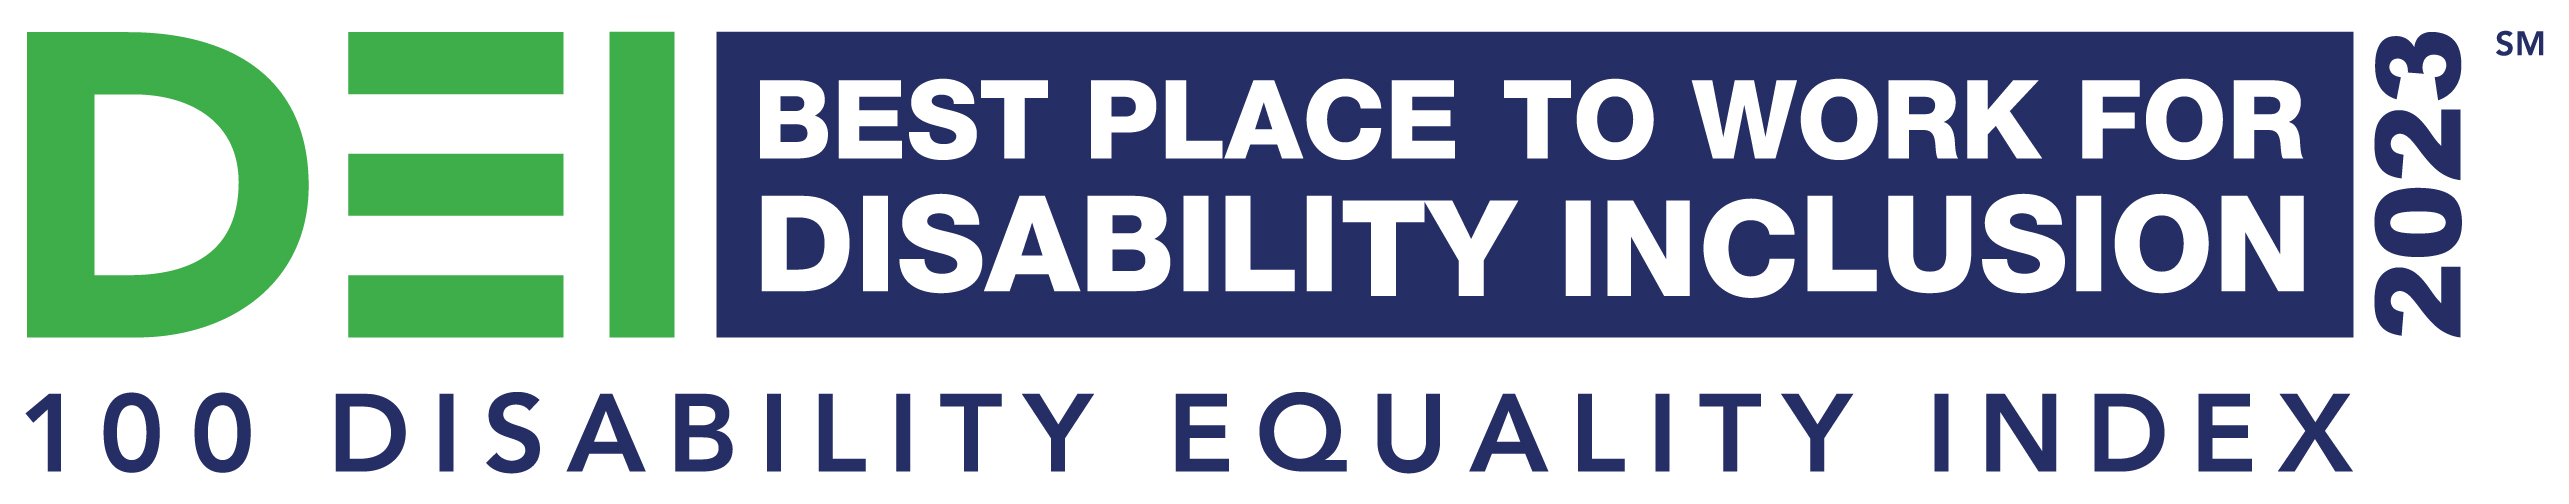 Best Place to Work for Disability Inclusion 2023 logo